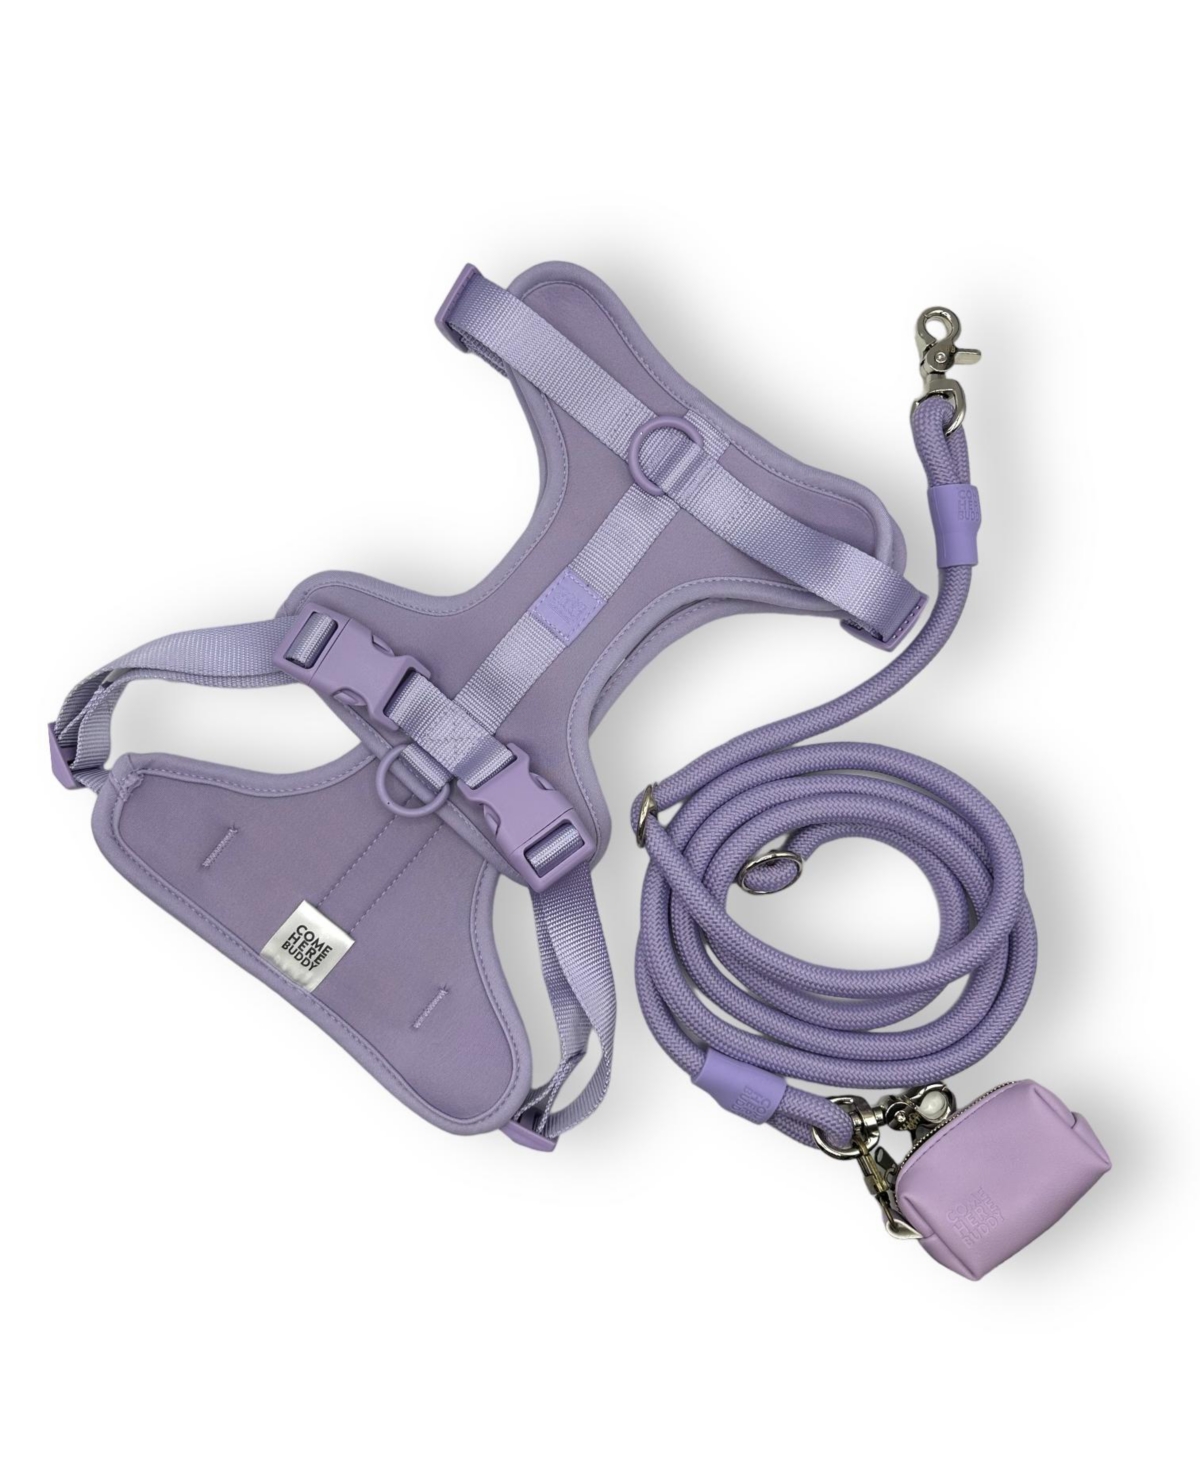 Lilac Hands Free Dog Leash and Harness Set - Lilac